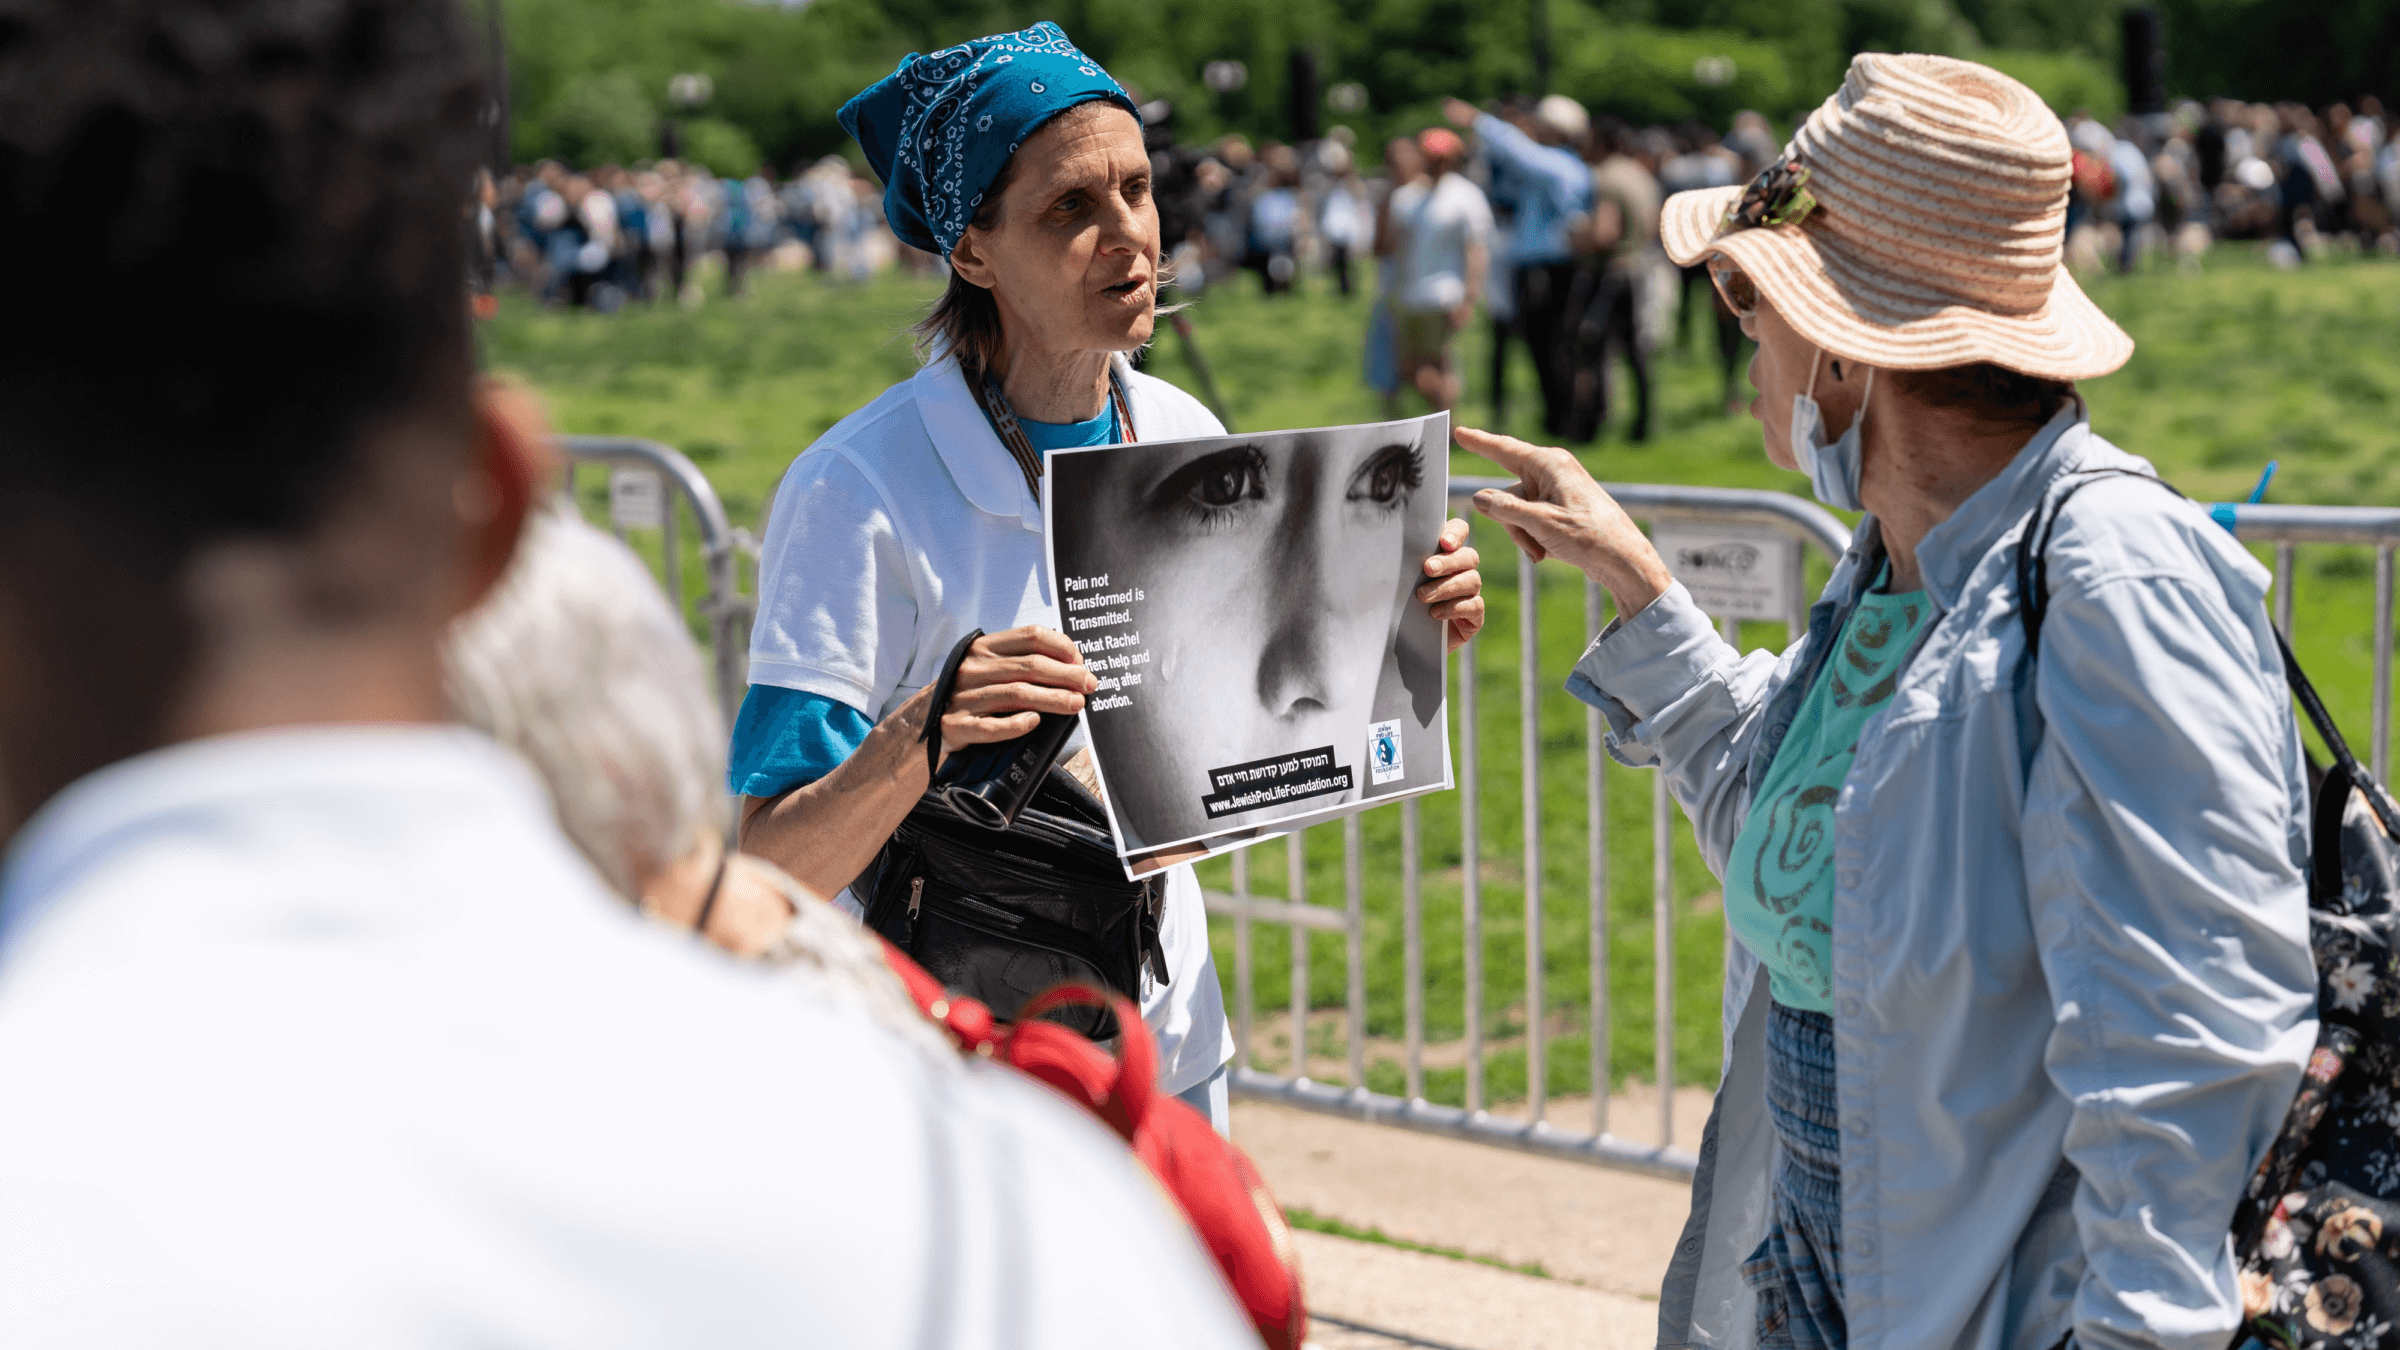 Cecily Routman, the head of the Jewish Pro-Life Foundation, at Tuesday’s Jewish Rally for Abortion Justice in Washington, D.C.